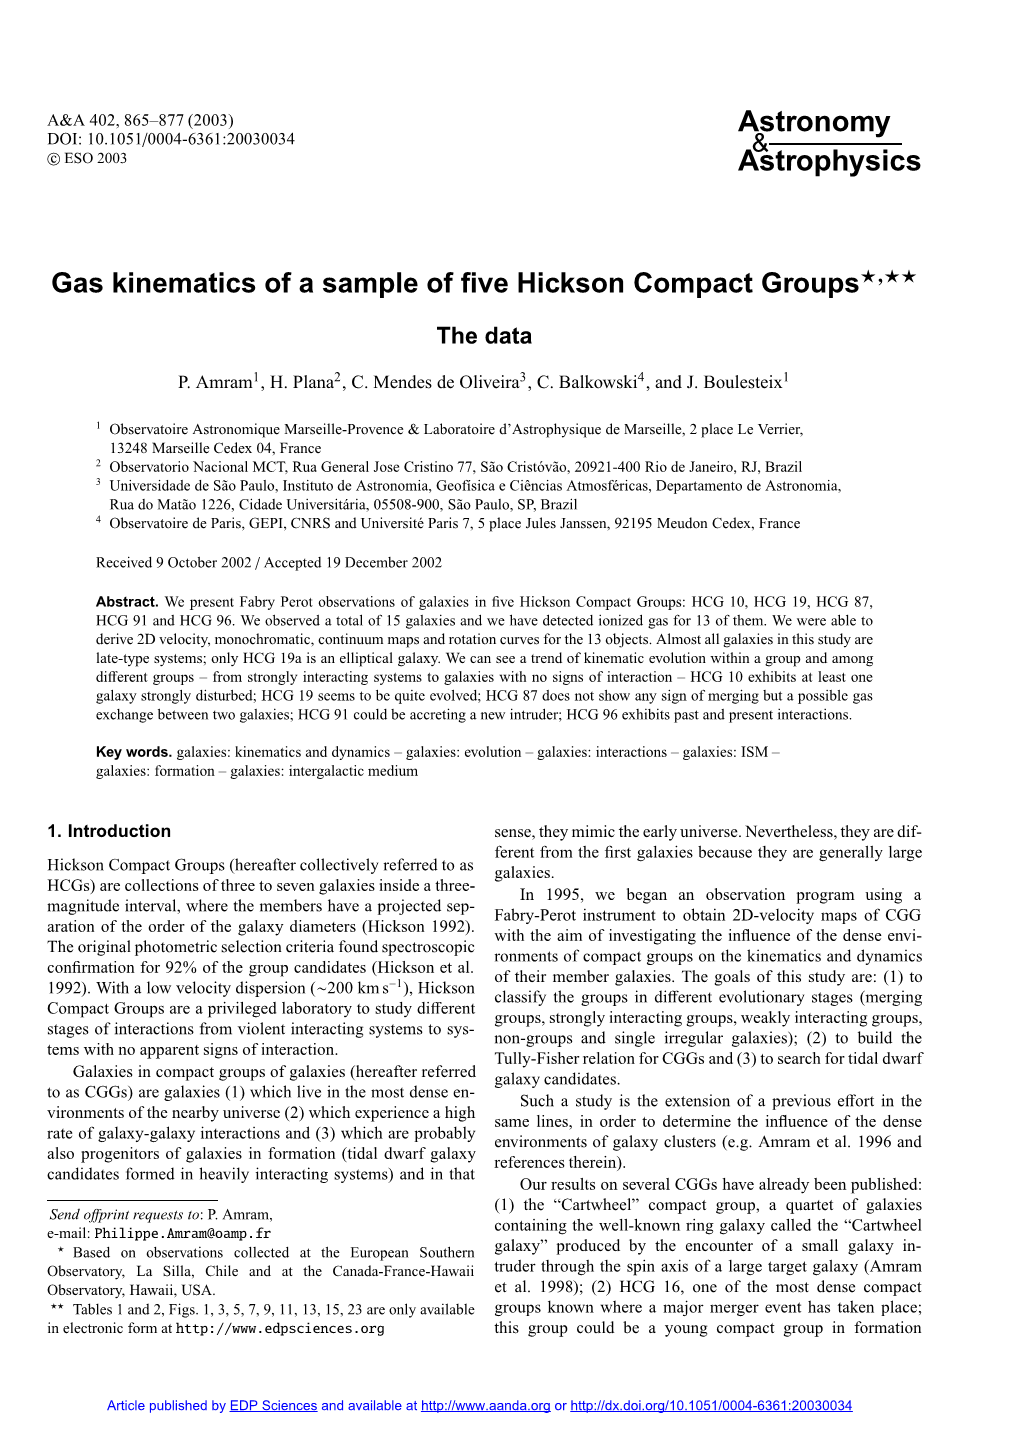 Gas Kinematics of a Sample of Five Hickson